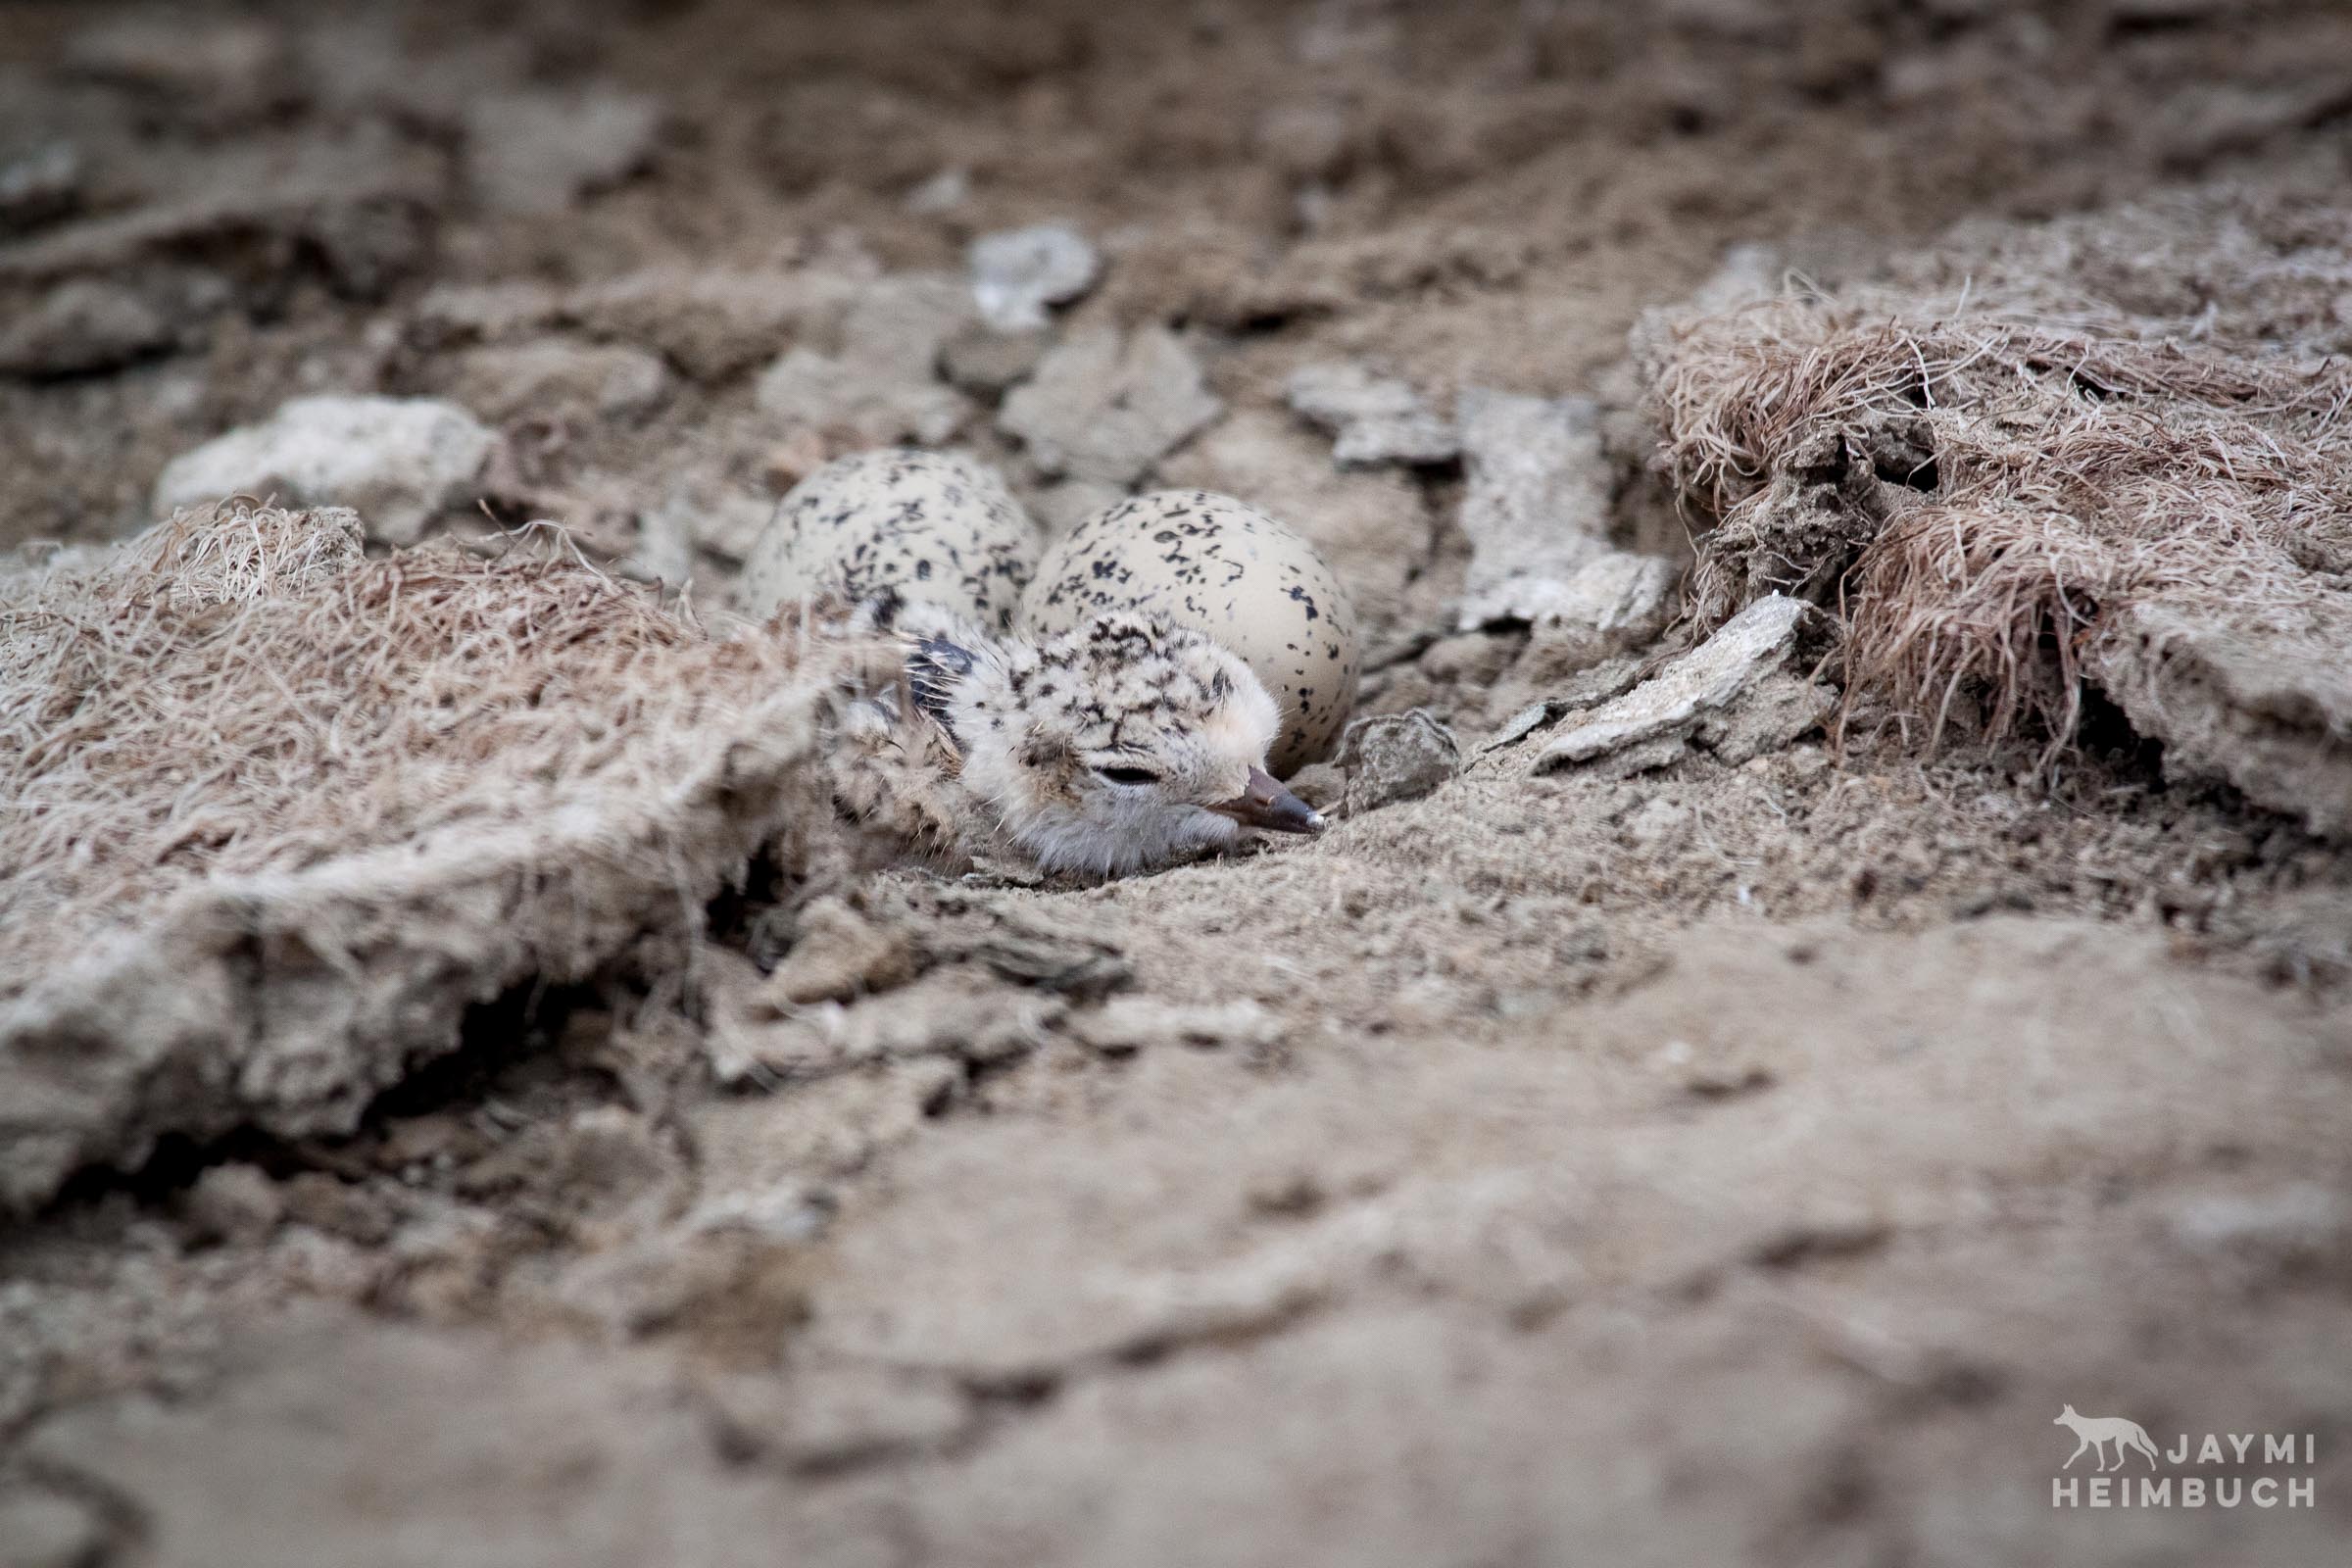 Western snowy plover chick just hatched